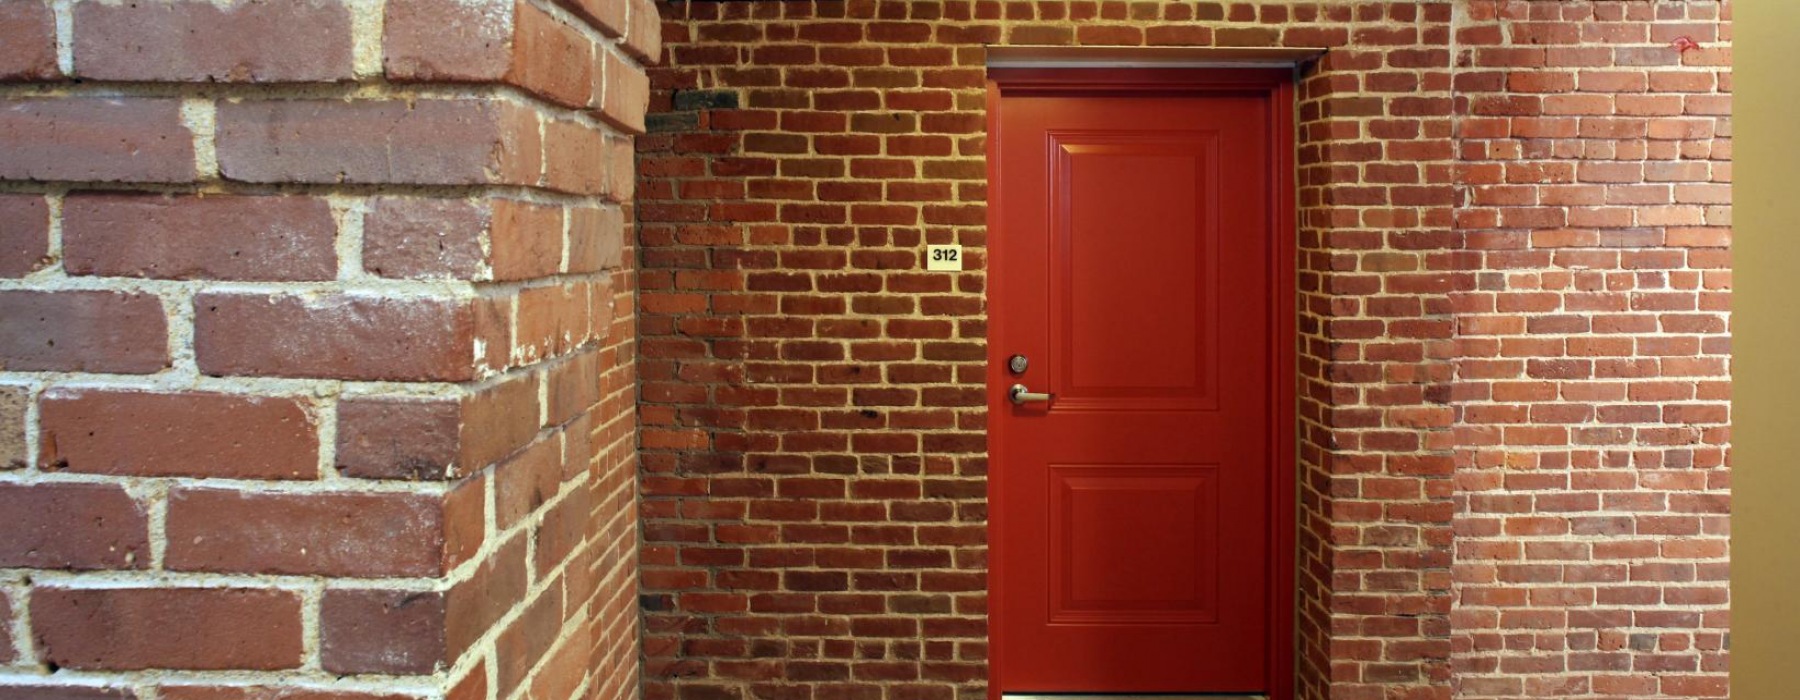 red door surrounded by red brick walls in hallway